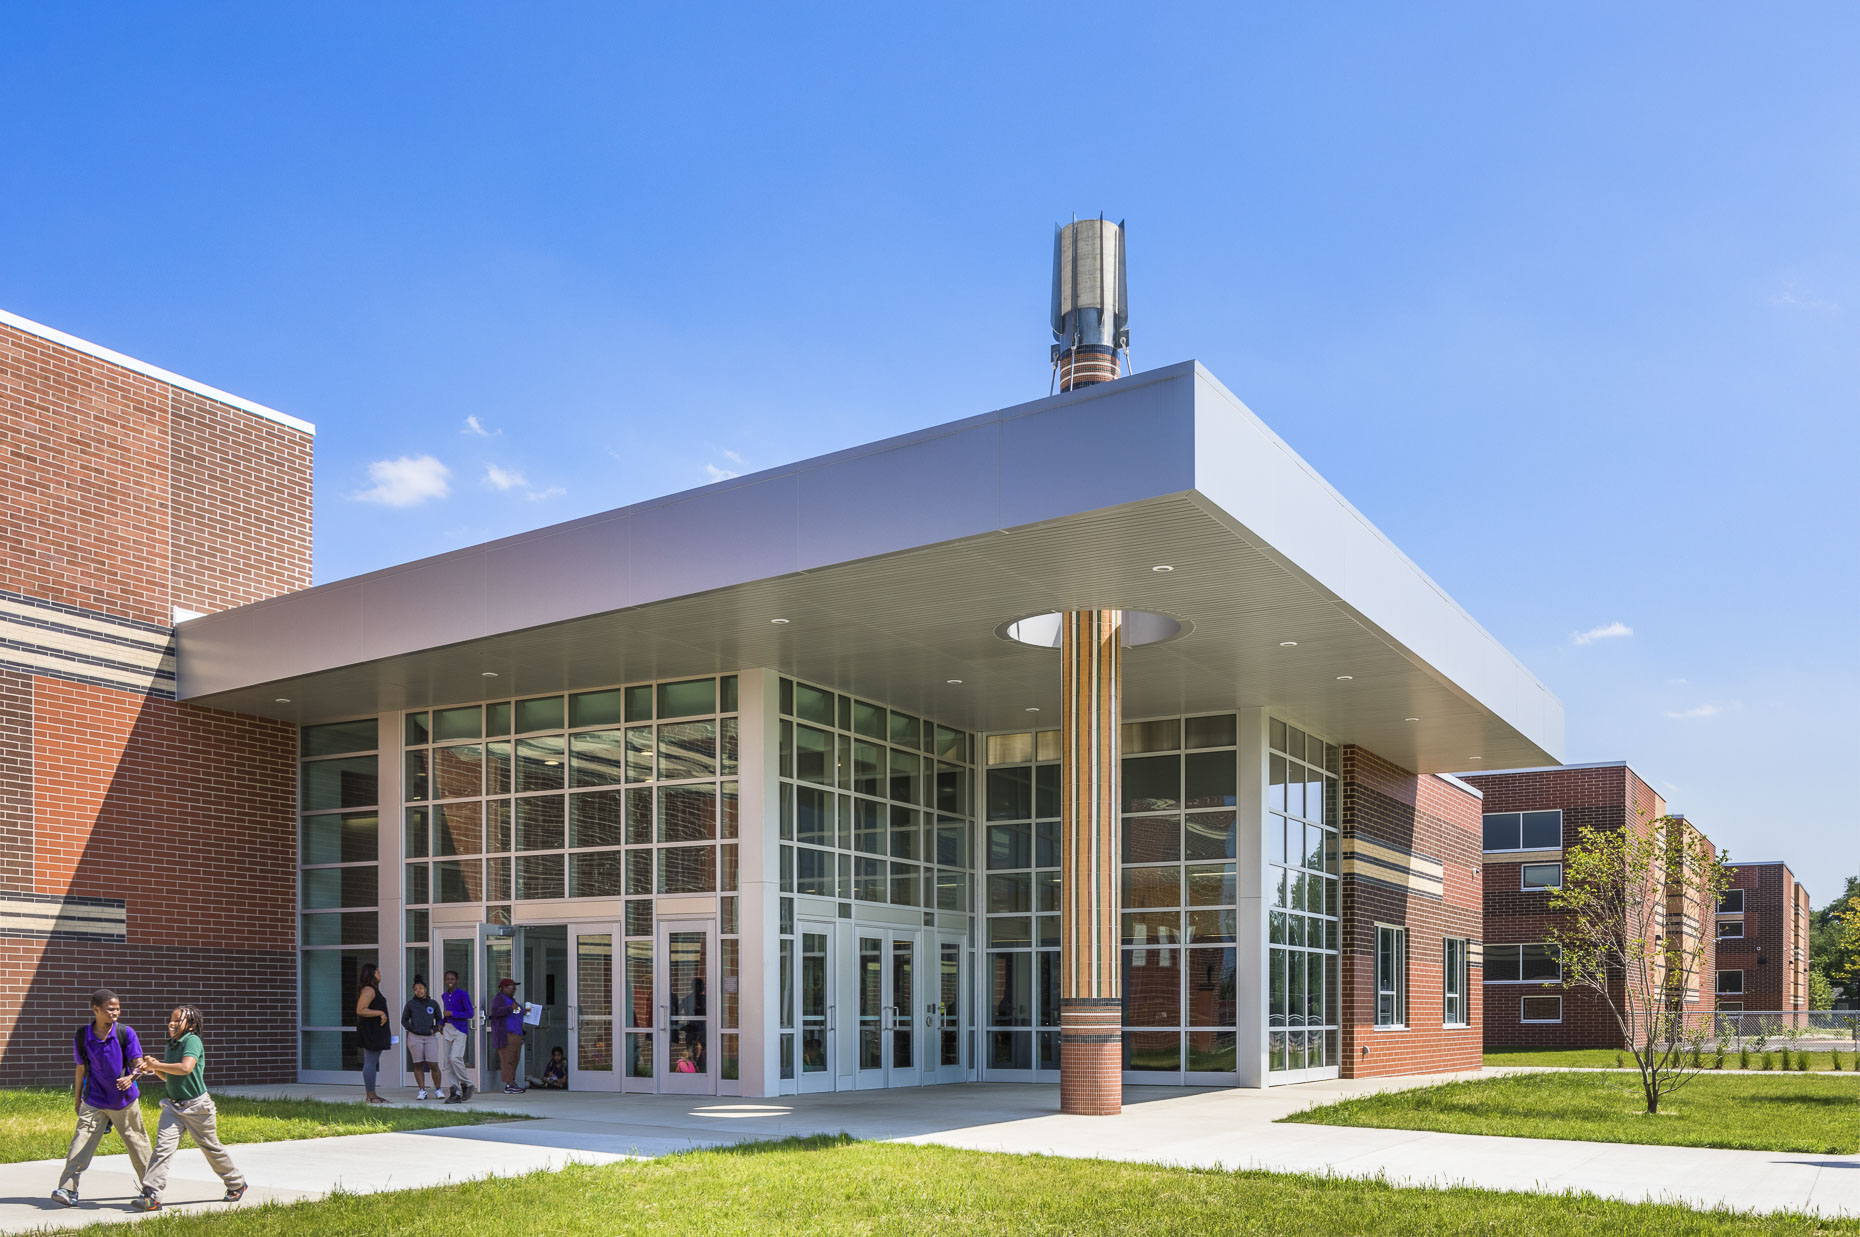 Columbus Africentric Early College K-12 by WSA Studio & HKI Associates photographed by Brad Feinknopf based in Columbus, Ohio